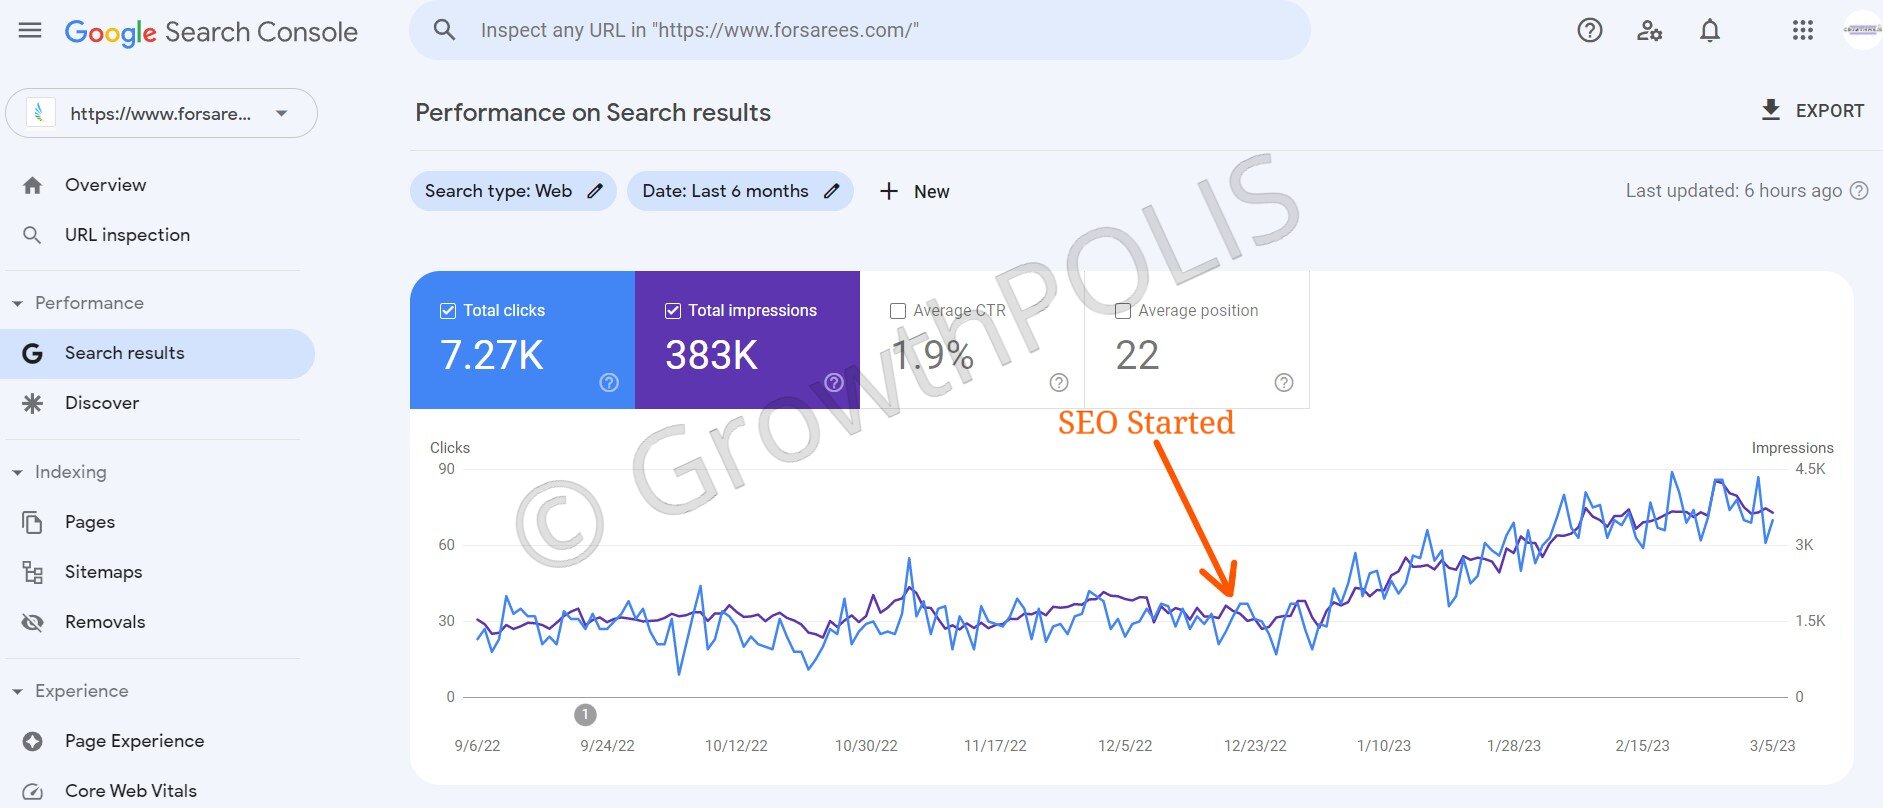 Forsarees Google Search Console indicating when SEO started